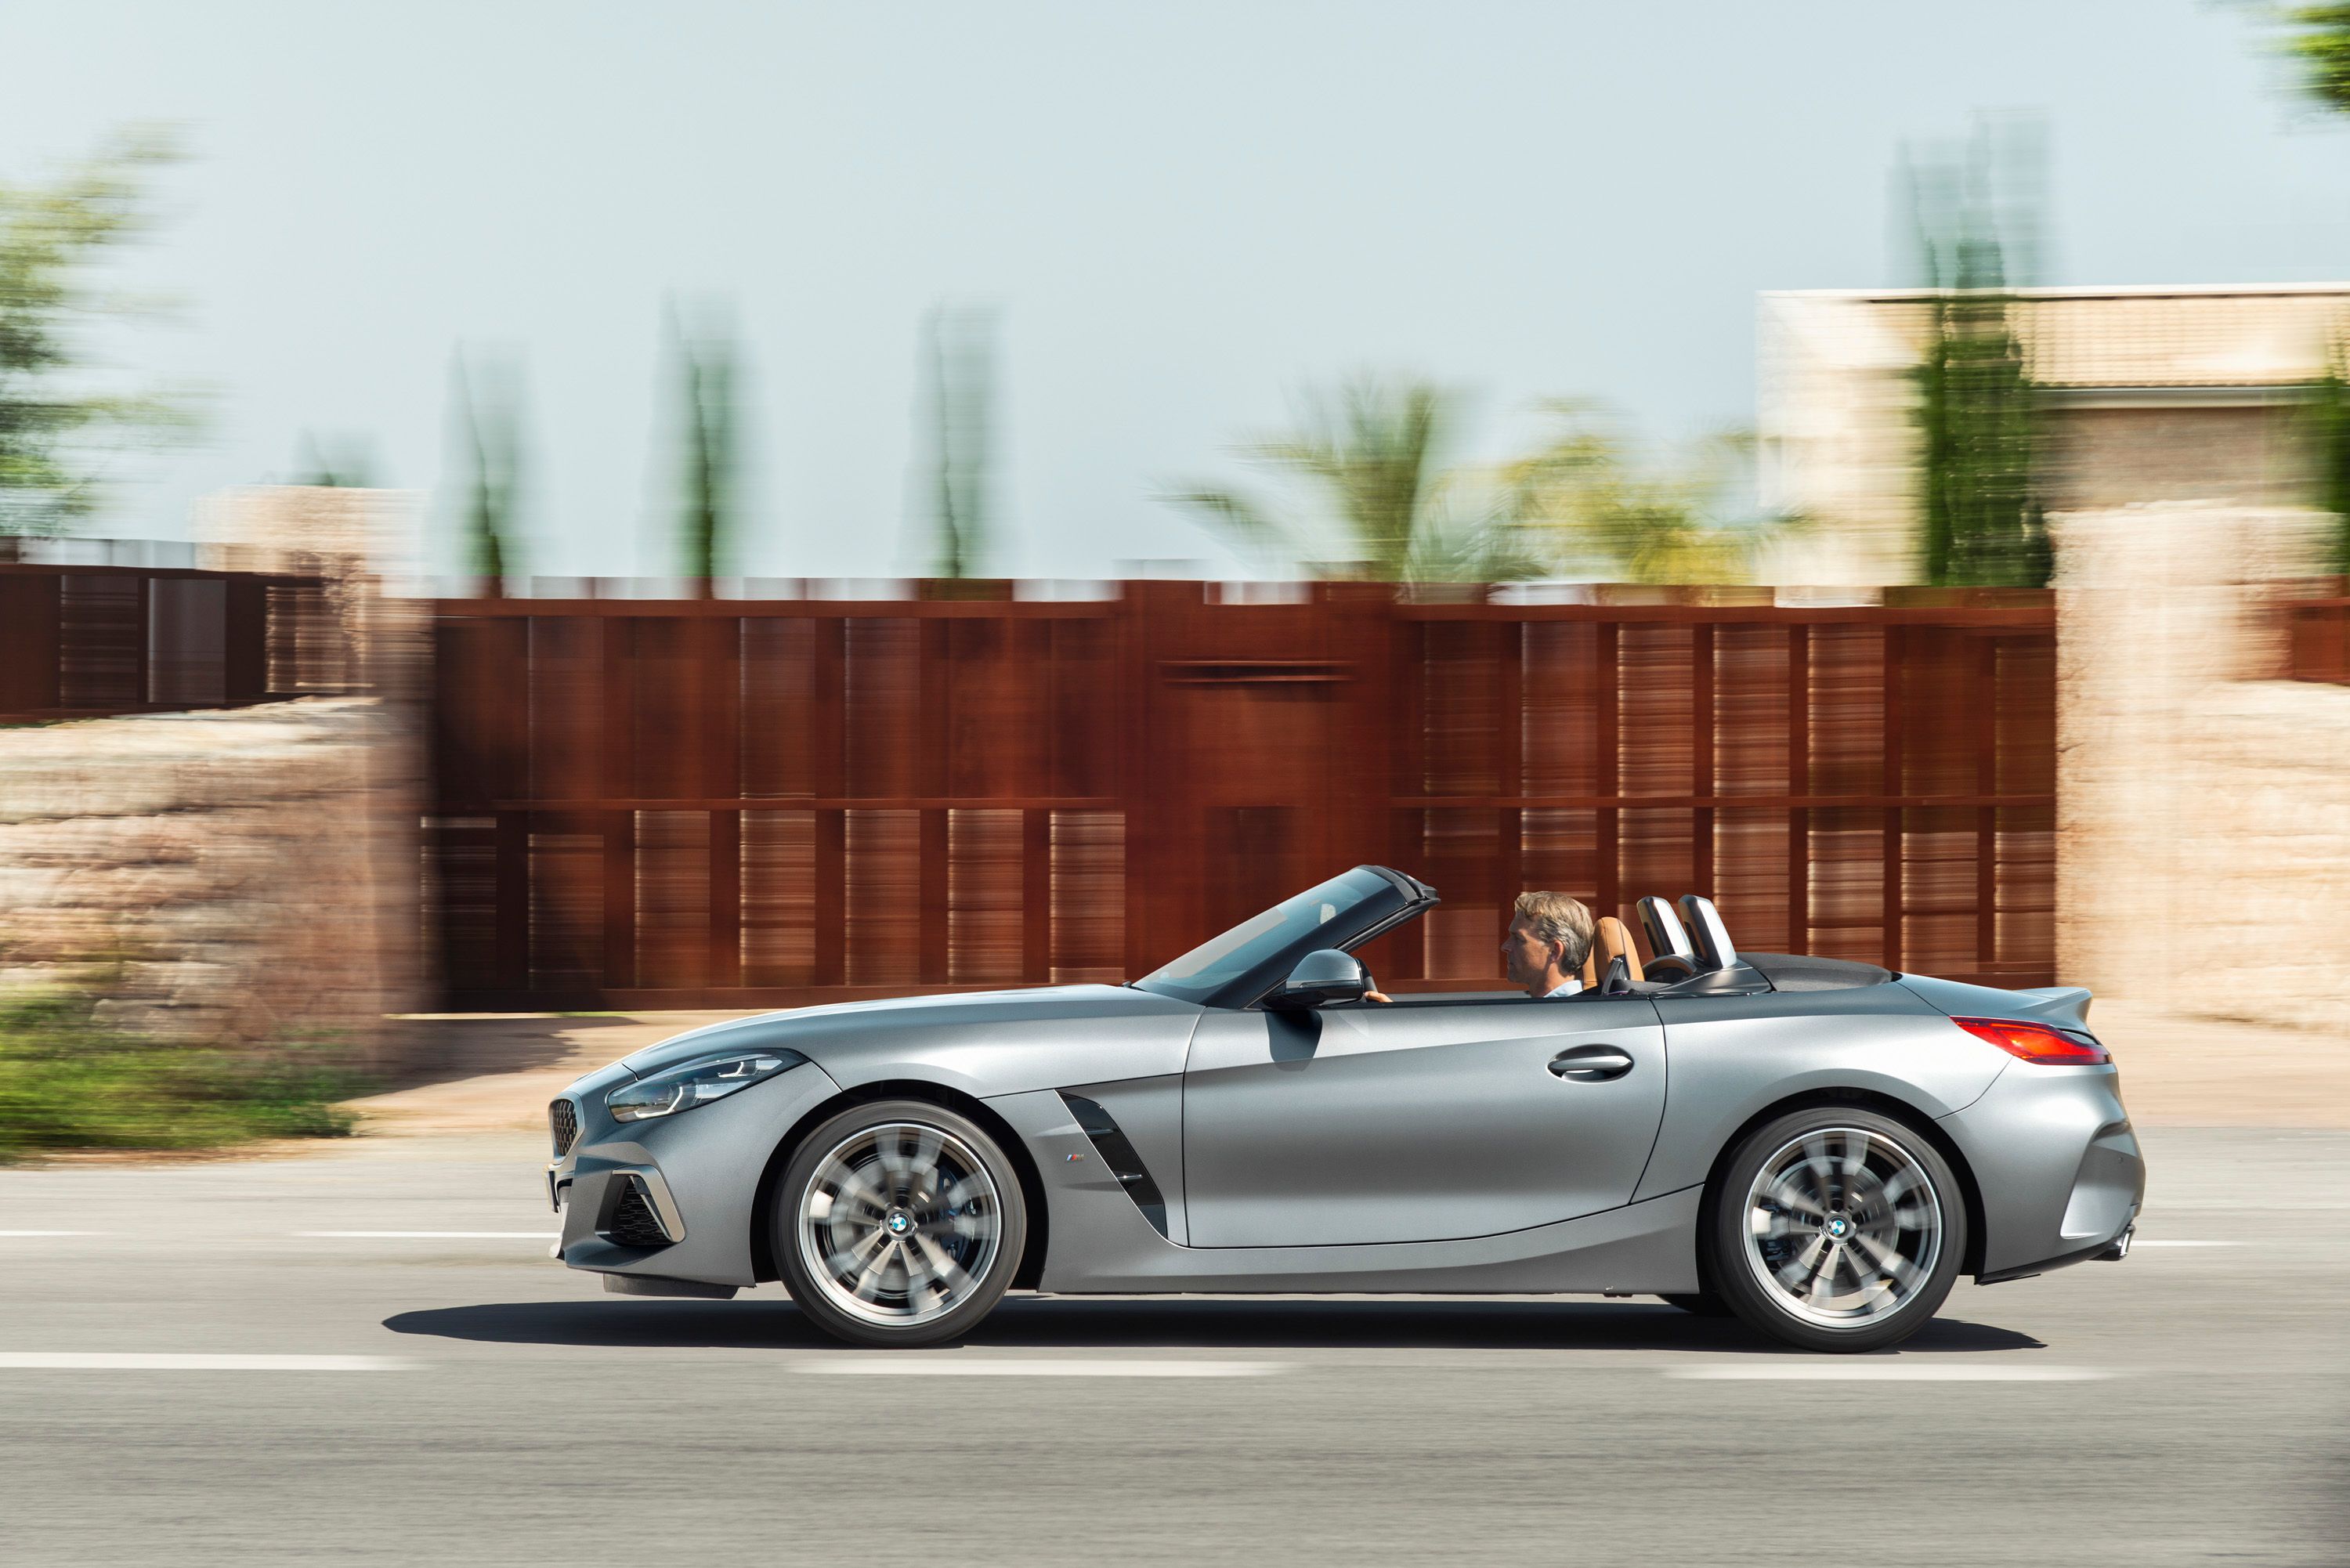 2020 If You’re Thinking of Leasing a 2020 Toyota Supra, You Might Want to Consider the 2020 BMW Z4 Instead